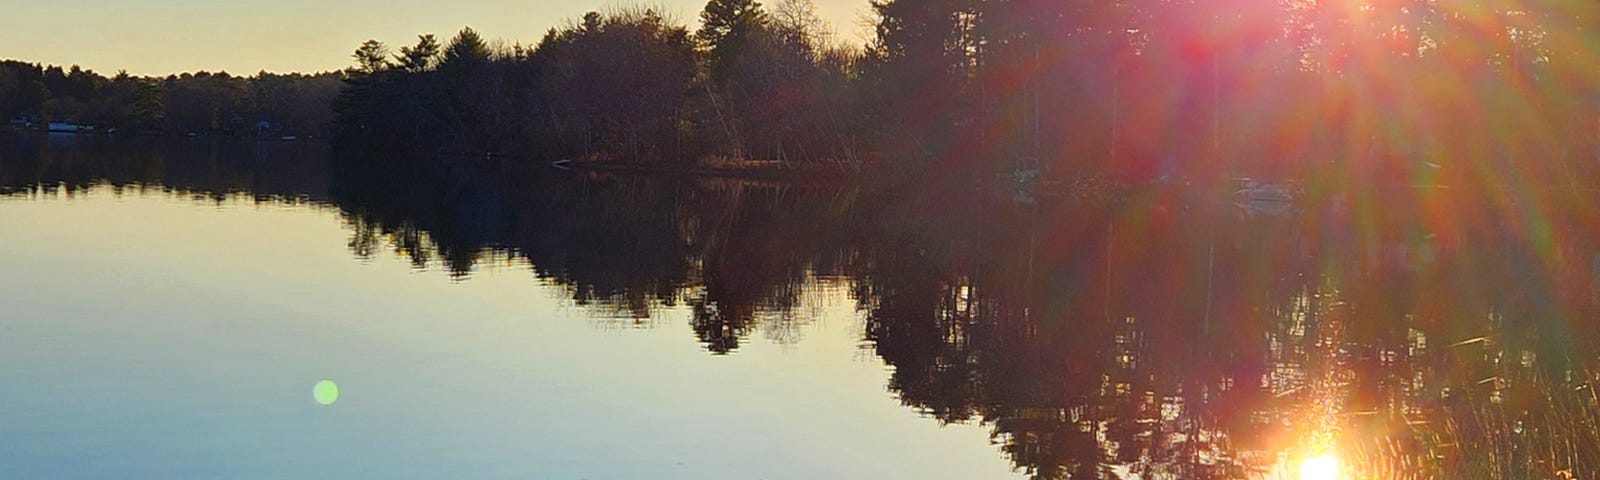 The sun peeking over the tree line in a clear blue sky, as above so below, the lake by the shore is also a clear blue still, reflection of above